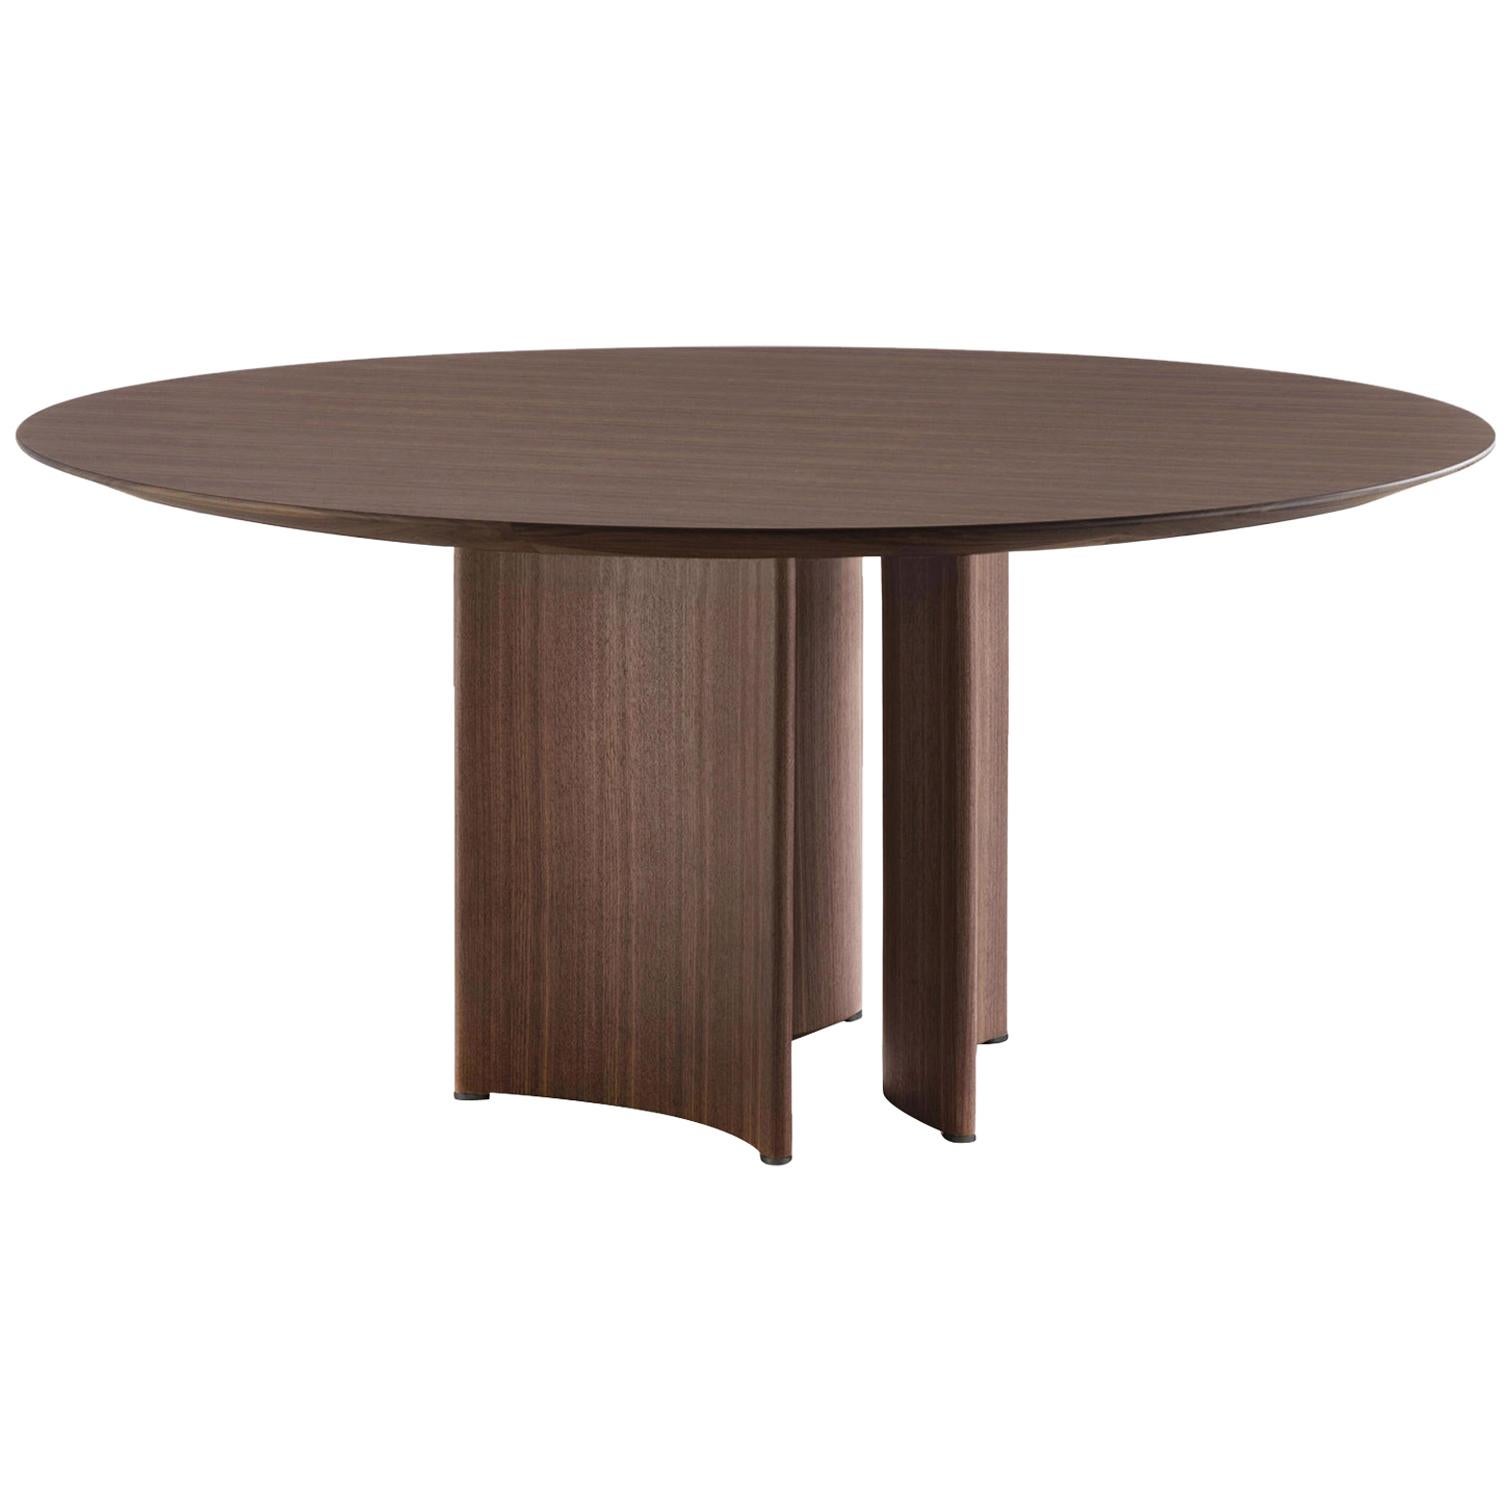 Ornament Dining Table For Sale